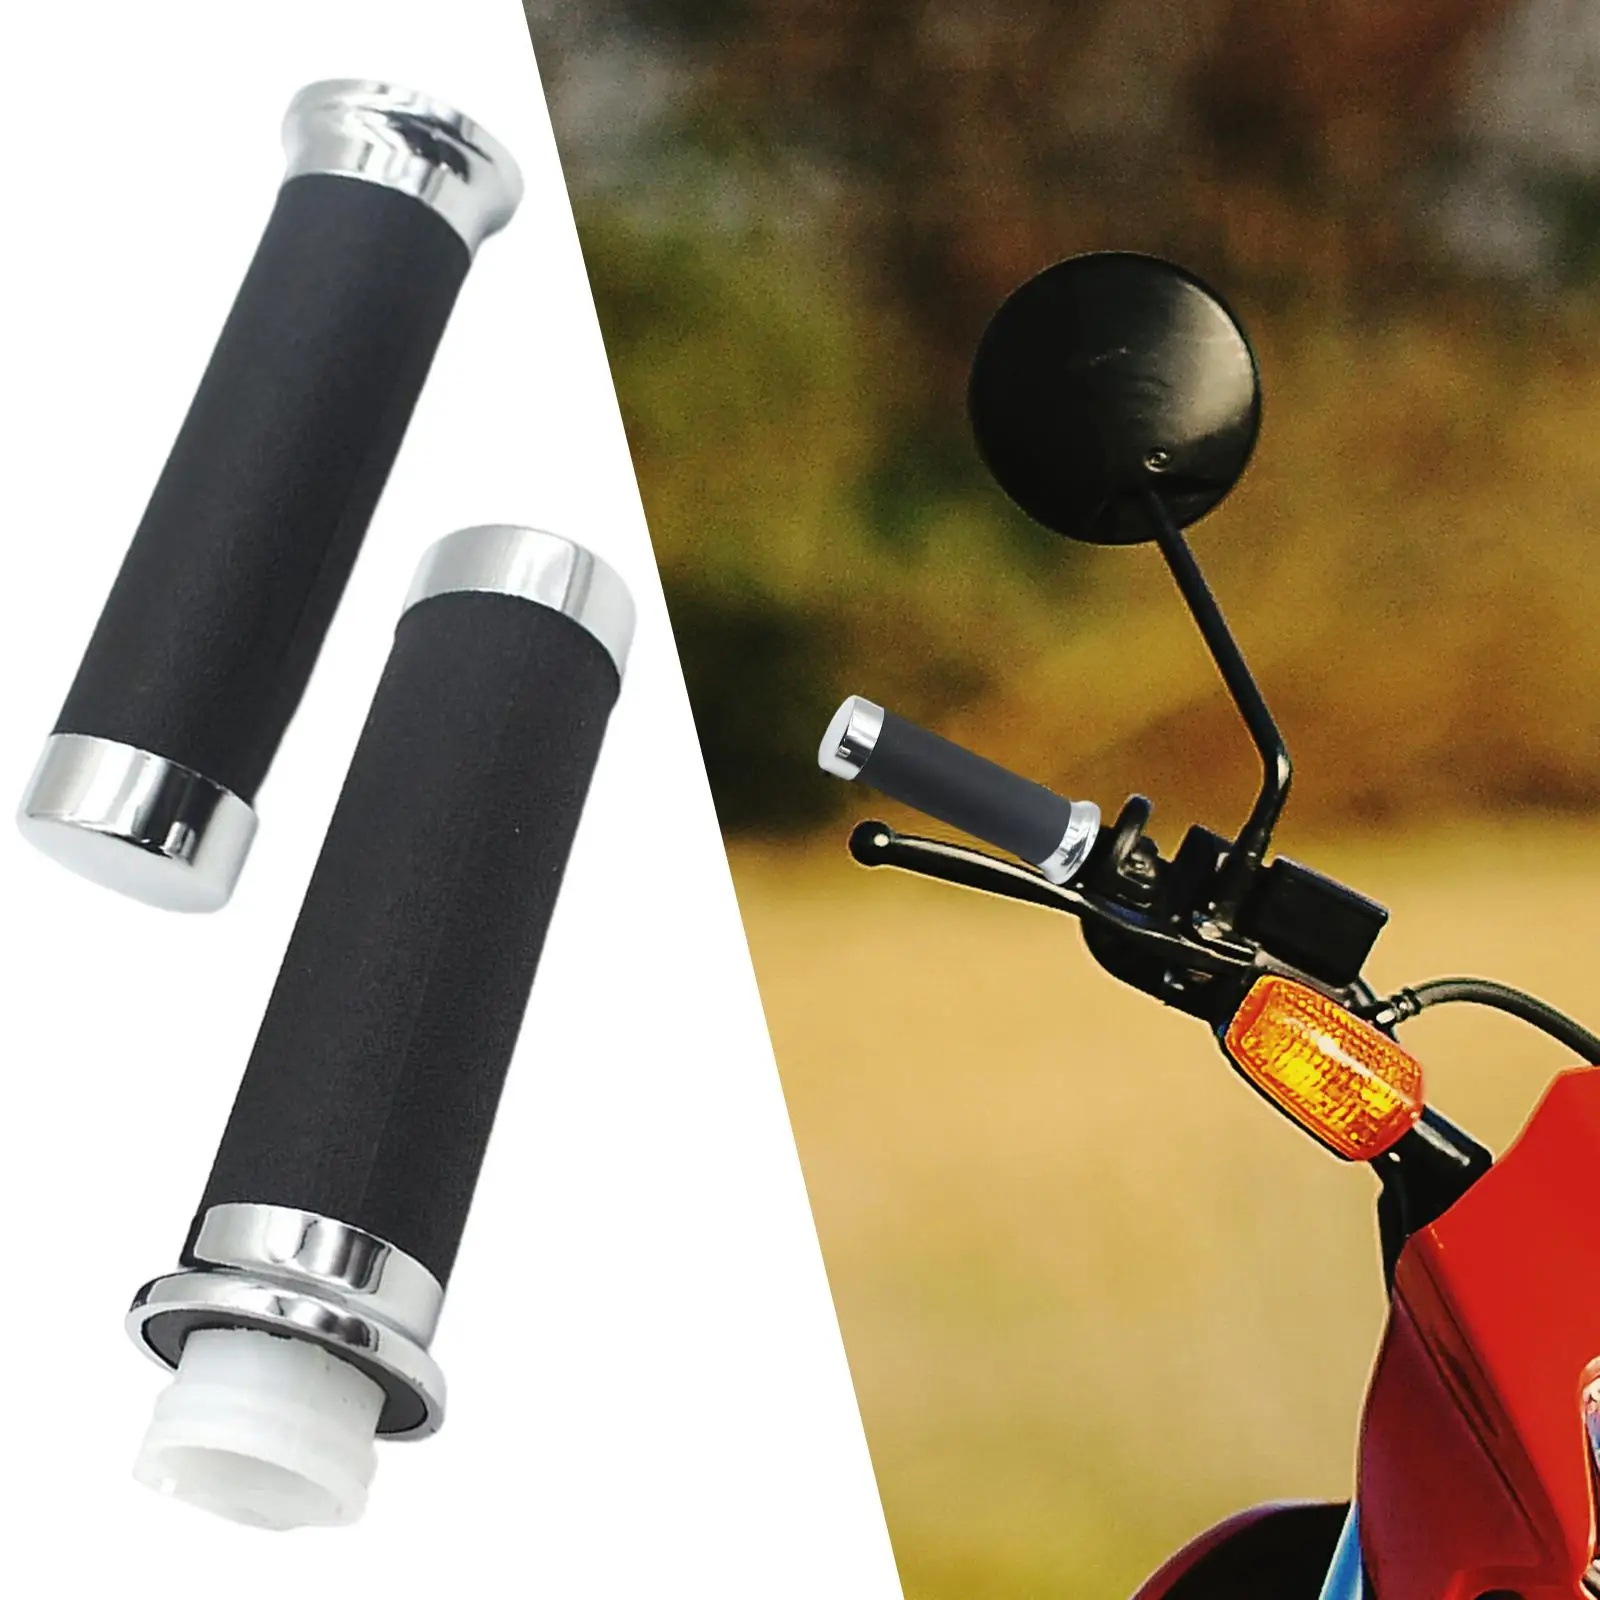 2Pcs 28mm Motorcycle Handlebar Grips Handle Grips for Shadow 400 750 Accessories Durable